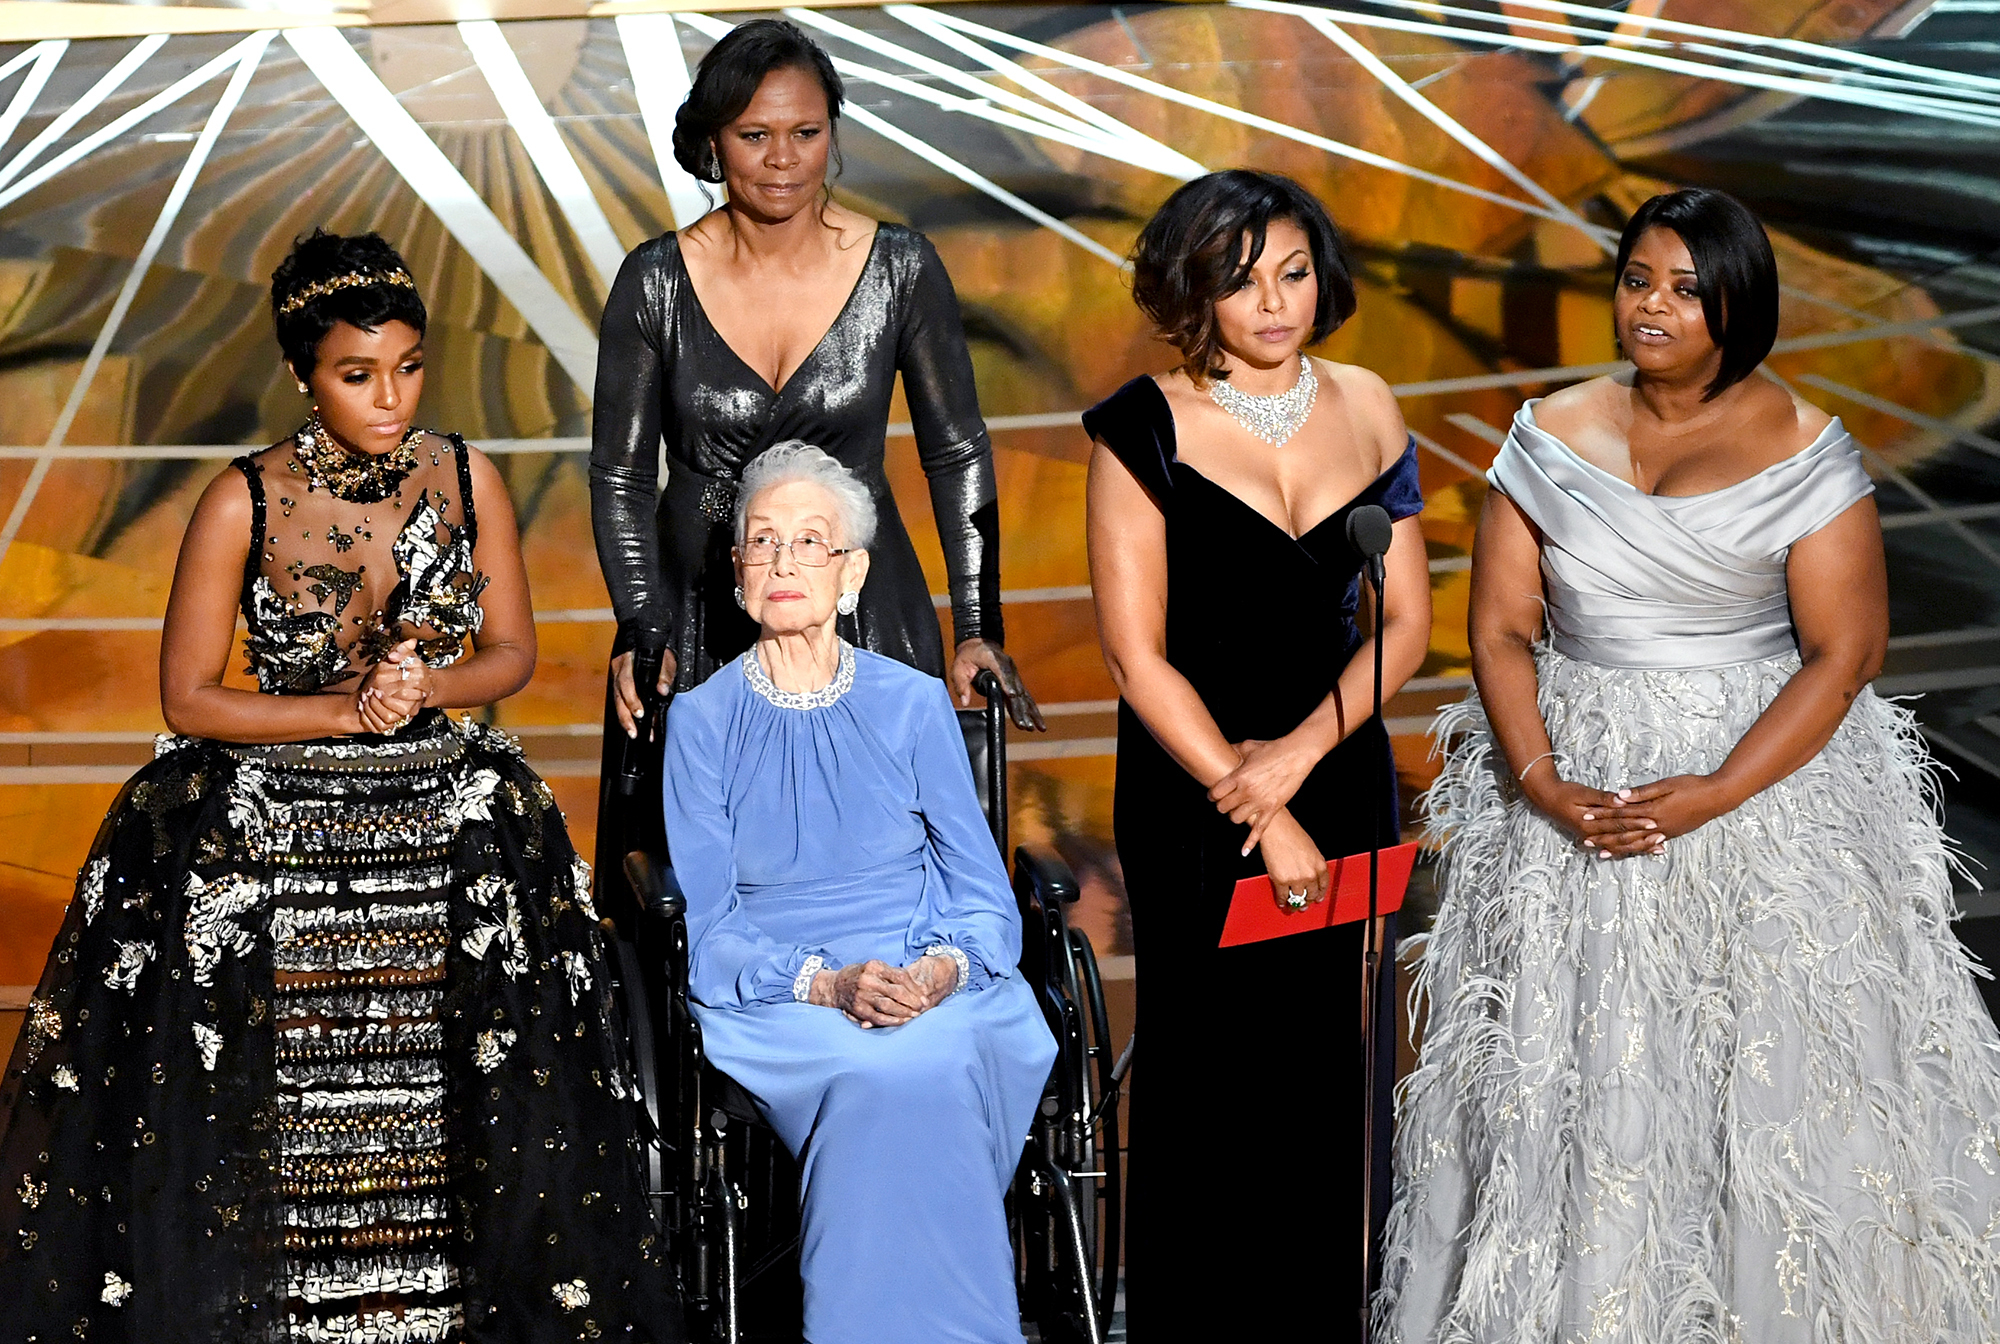 The Real Katherine Johnson with her Hidden Figures counterparts at The Oscars 2017 | onetakekate.com